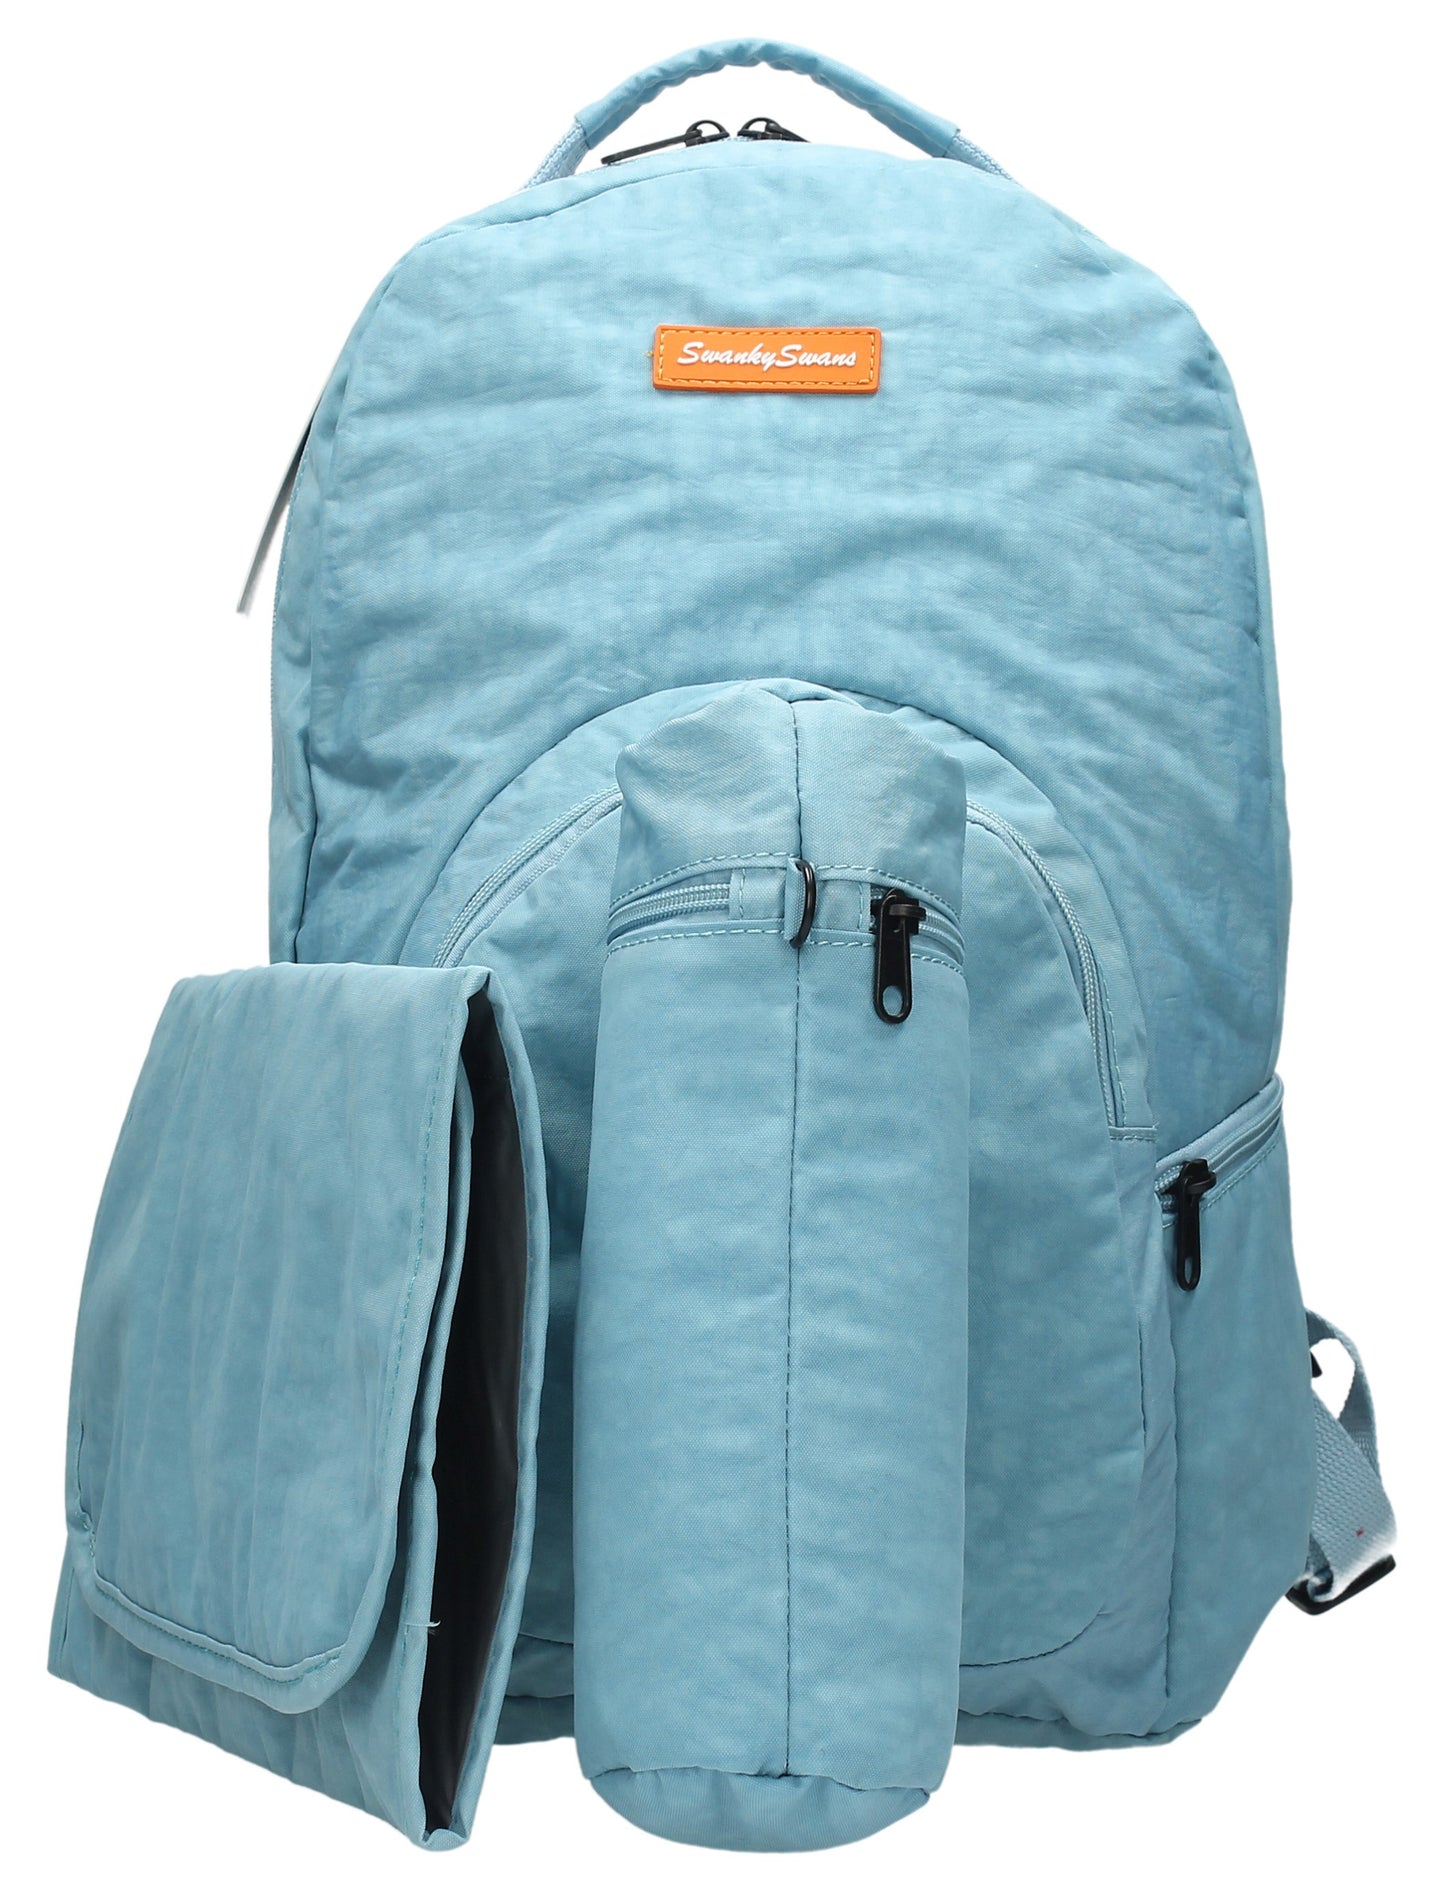 Joseph & Mary Baby Changing Backpack - Light Blue-Baby Changing-SWANKYSWANS